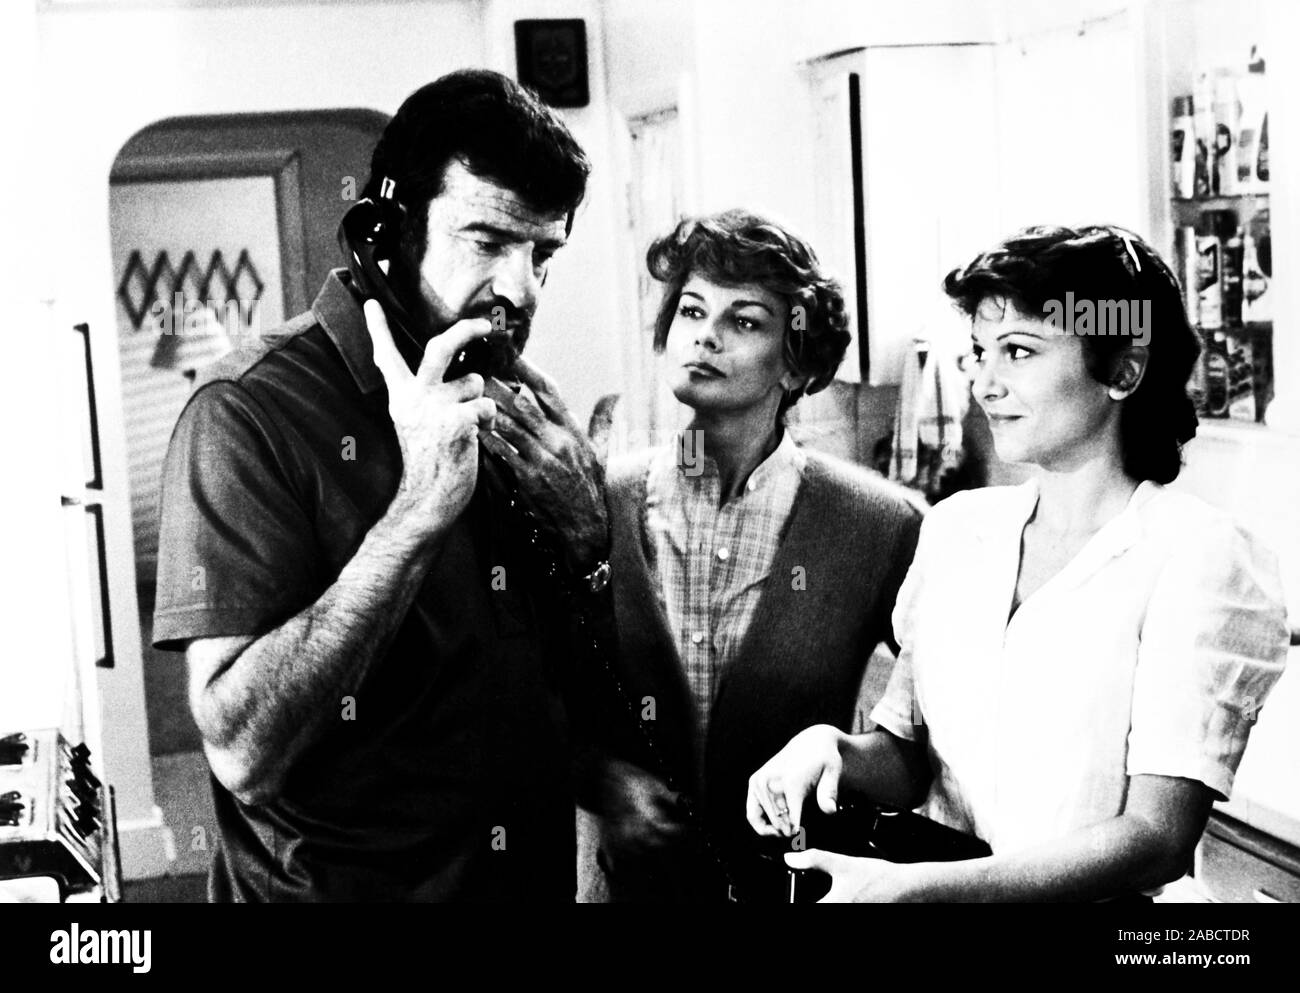 I OUGHT TO BE IN PICTURES, from left, Walter Matthau, Ann-Margret, Dinah Manoff, 1982, TM & Copyright ©20th Century Fox Film Corp./courtesy Everett Collection Stock Photo